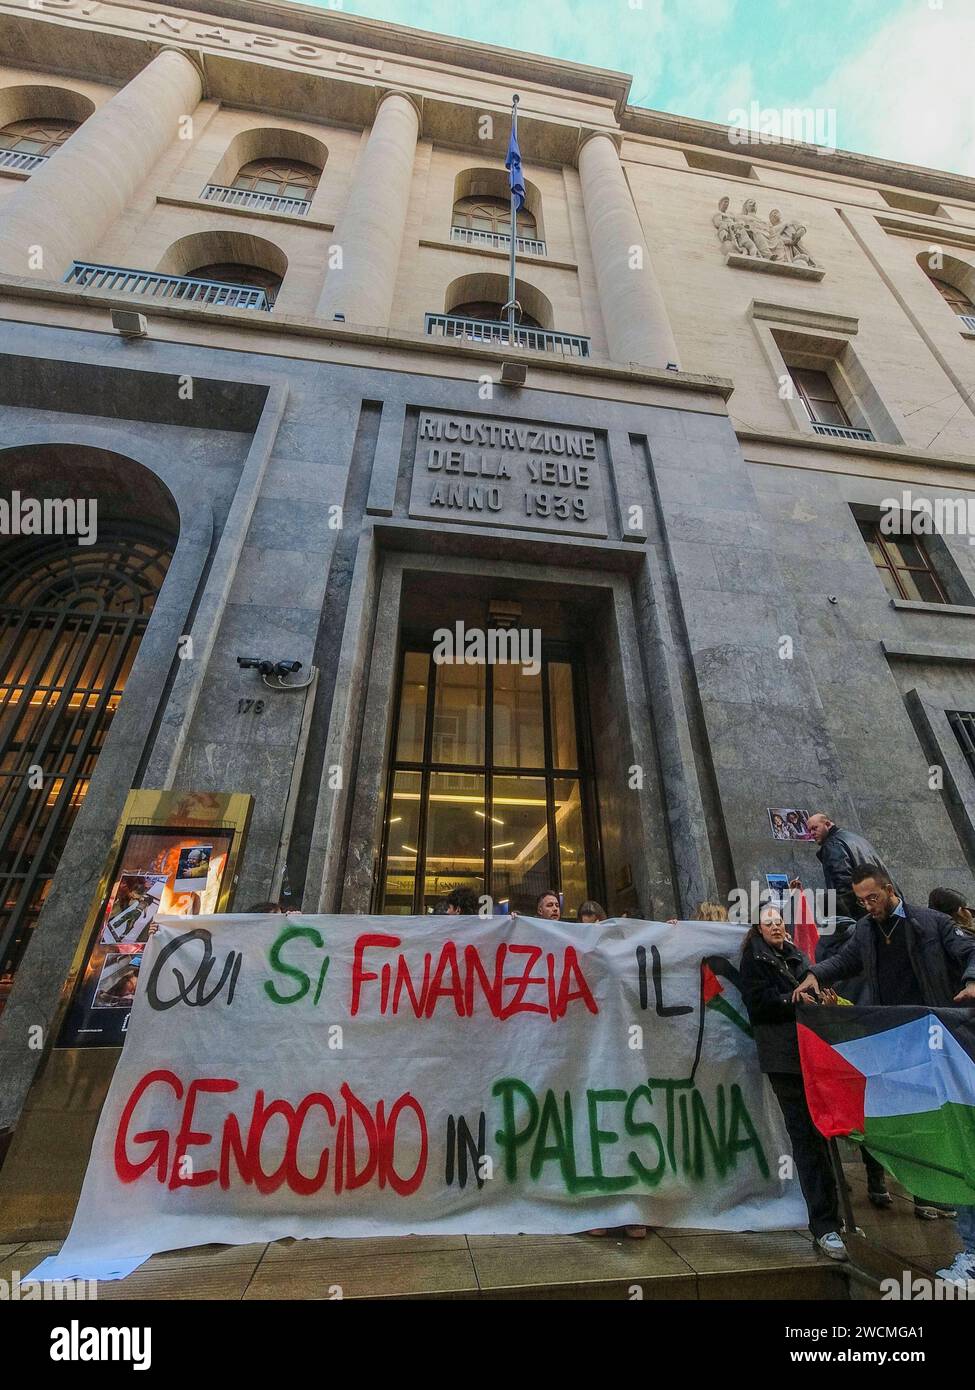 Pro-Palestinian blitz at the Intesa Sanpaolo bank Pro-Palestinian blitz at the Intesa Sanpaolo headquarters in via Toledo. This afternoon, a few dozen activists burst into the intesa san paolo bank building, chanting chants and slogans for the people of Gaza. Here the genocide in Palestine is being financed reads a large banner unfurled in front of the bank, papered by the protesters with leaflets depicting the macabre images of children who died under bombing in the Middle East. DJI 0720 Copyright: xAntonioxBalascox Stock Photo